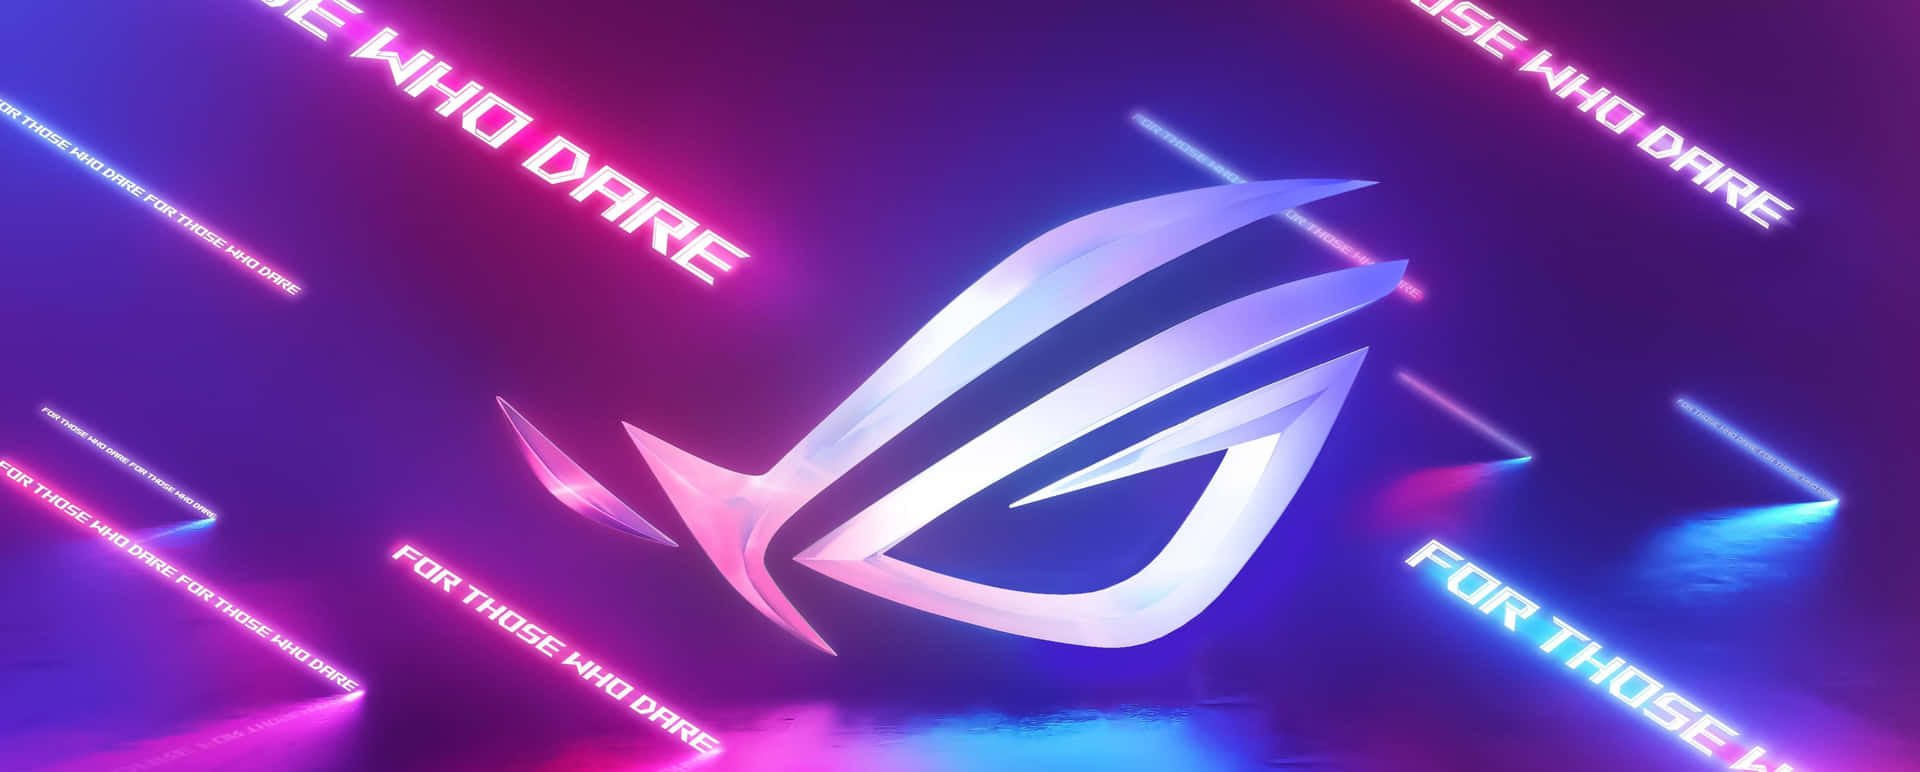 Asus Rog Logo With Neon Lights